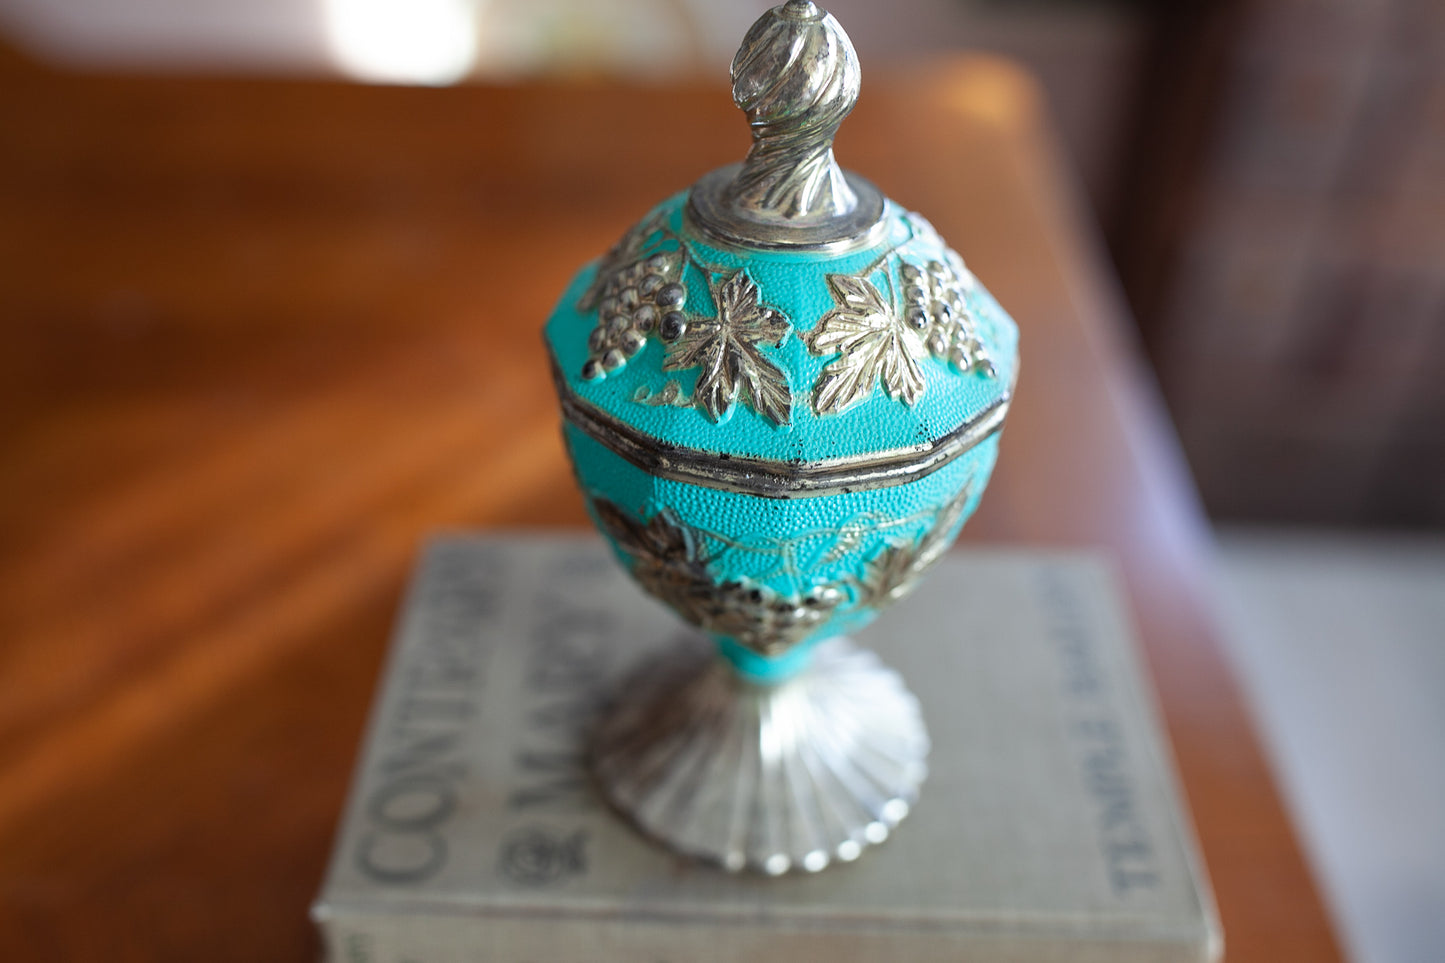 Vintage Candy Dish - Turquoise Bowl with Lid - Trinket Dish